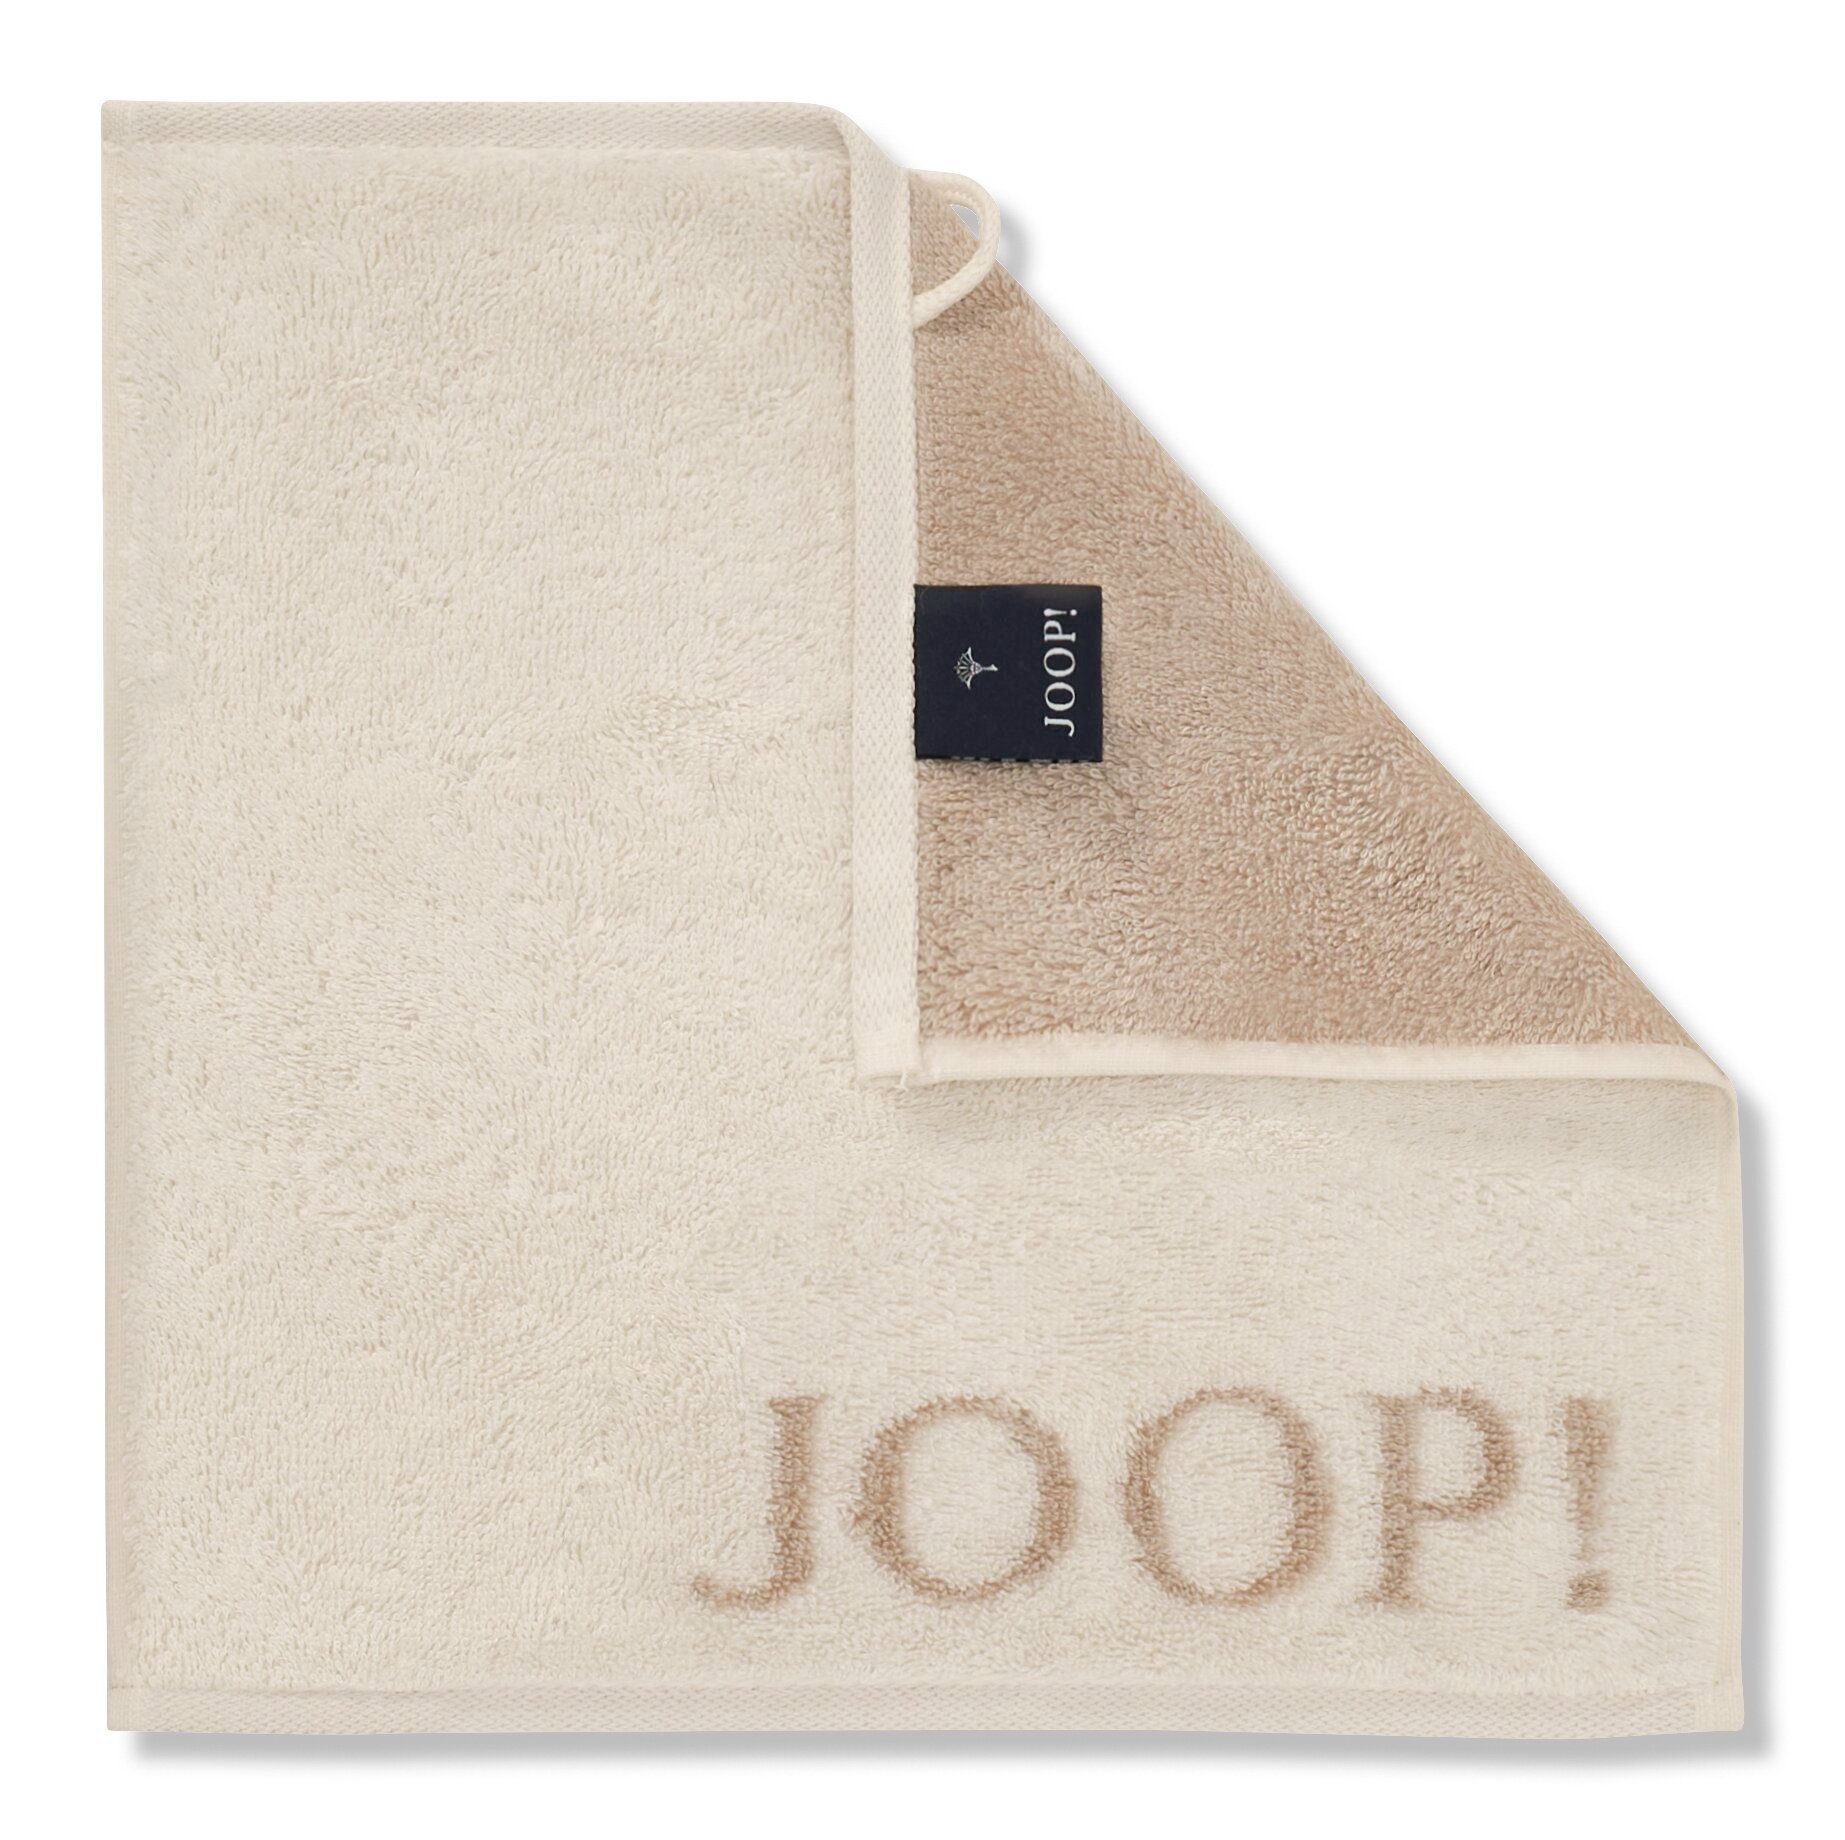 Creme DOUBLEFACE Seiftuch Joop! JOOP! - CLASSIC LIVING Seifentuch-Set (3-tlg)